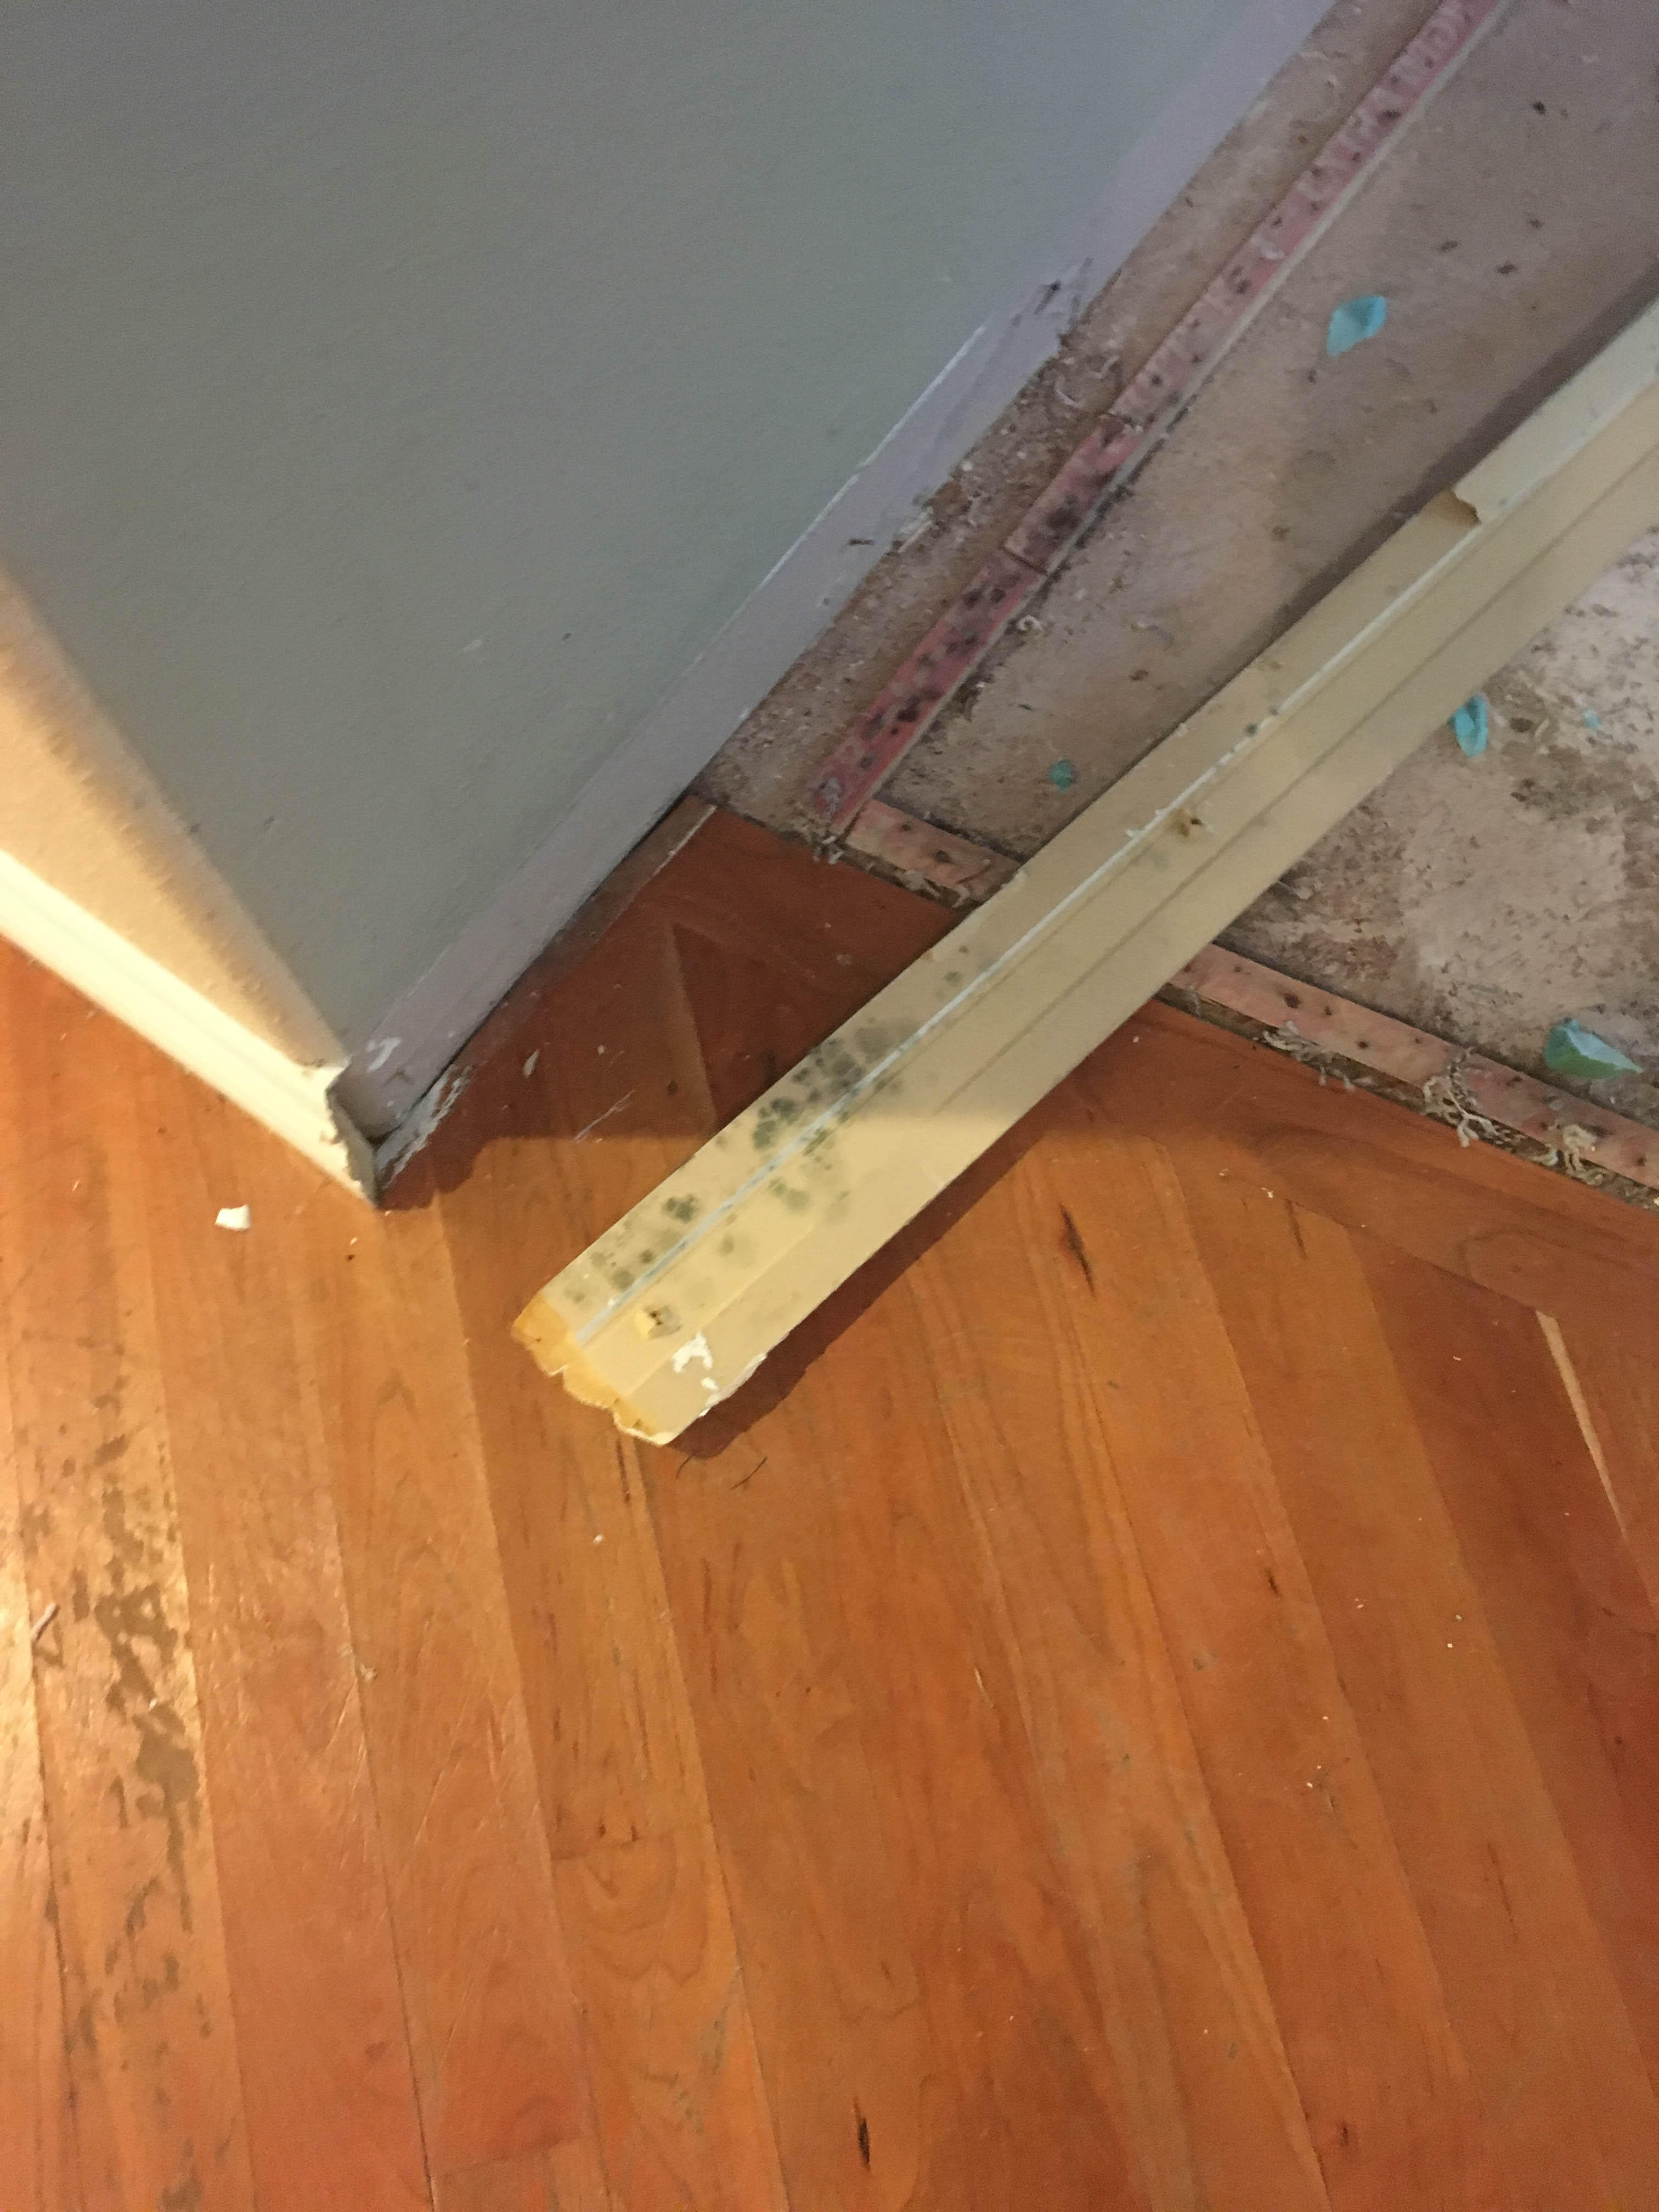 It's possible to discover mold in unexpected places after water damage. Mold will grow and spread if you ignore it. Rely on SERVPRO of Shoreline/Woodinville for all of your mold damage cleanup and remediation needs in Shoreline, WA. Give us a call!